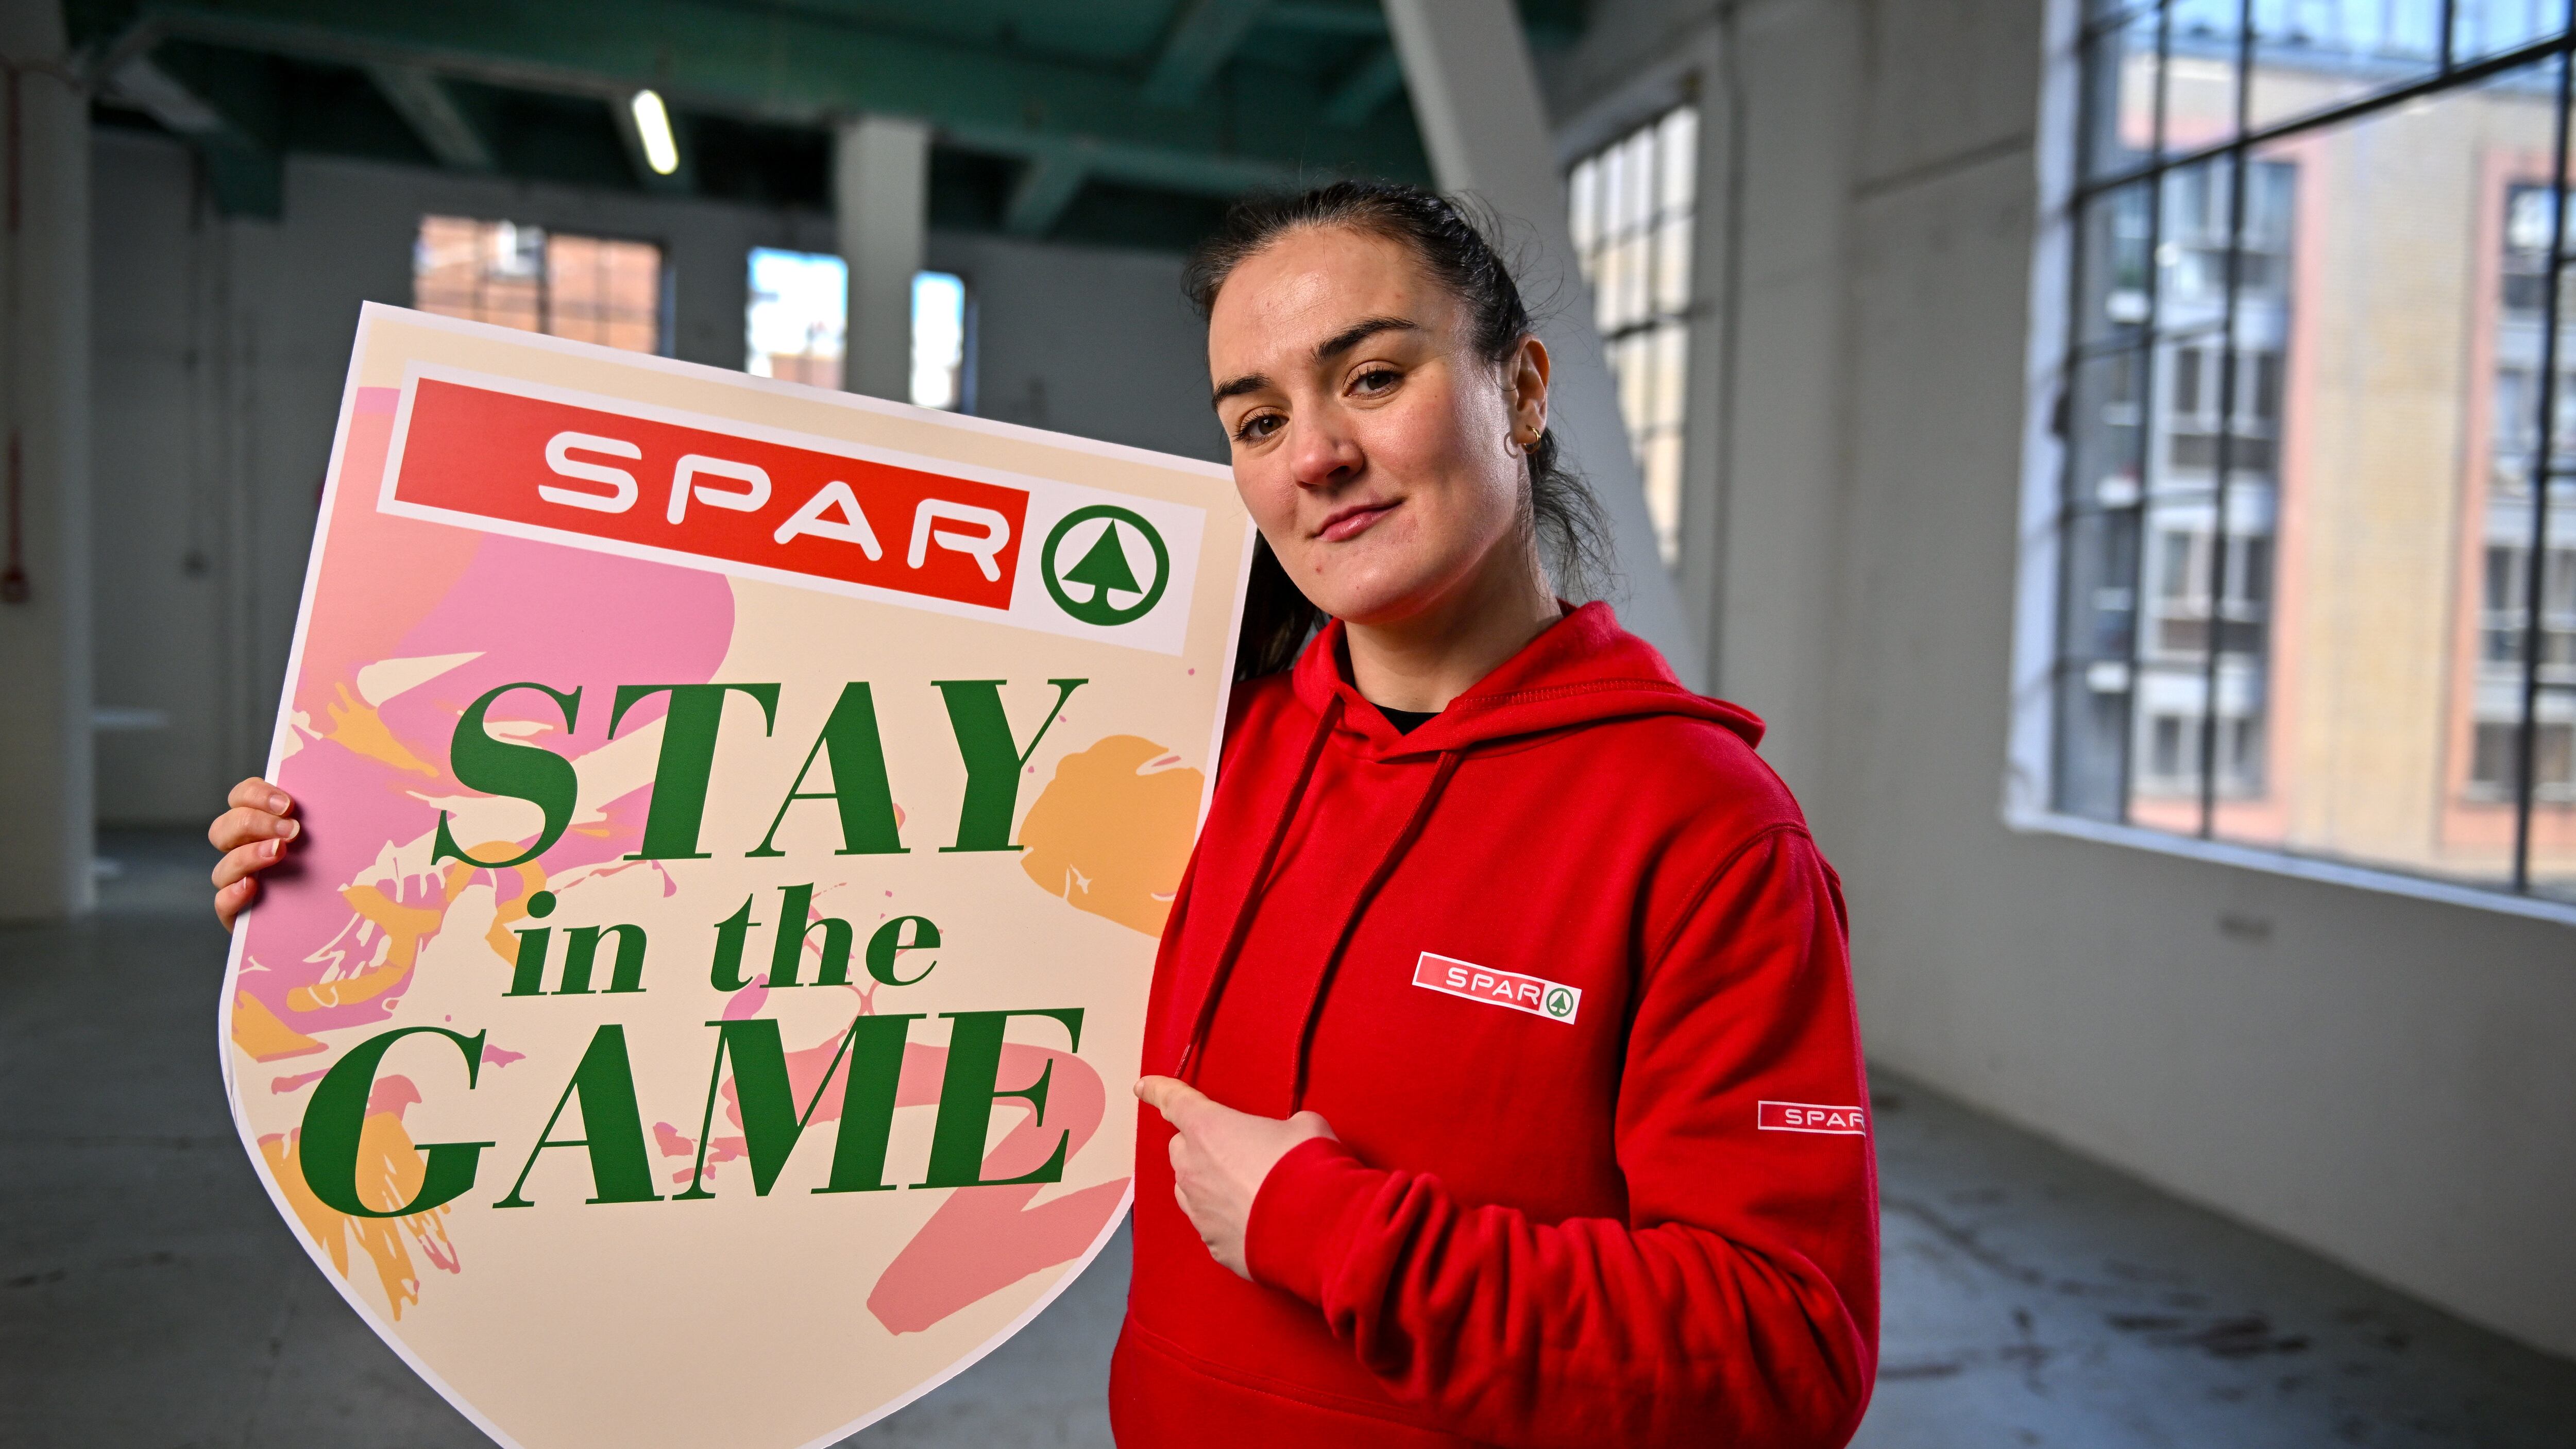 Irish boxer Kellie Harrington pictured at the launch of the SPAR Stay in the Game campaign. The campaign, which is part of SPAR's community fund, will run until June 30 and encourages the public to nominate a school or club in their community that is fostering the continued participation of girls in sport. To nominate a post-primary school or club visit www.spar.ie/communityfund. Picture by Sportsfile